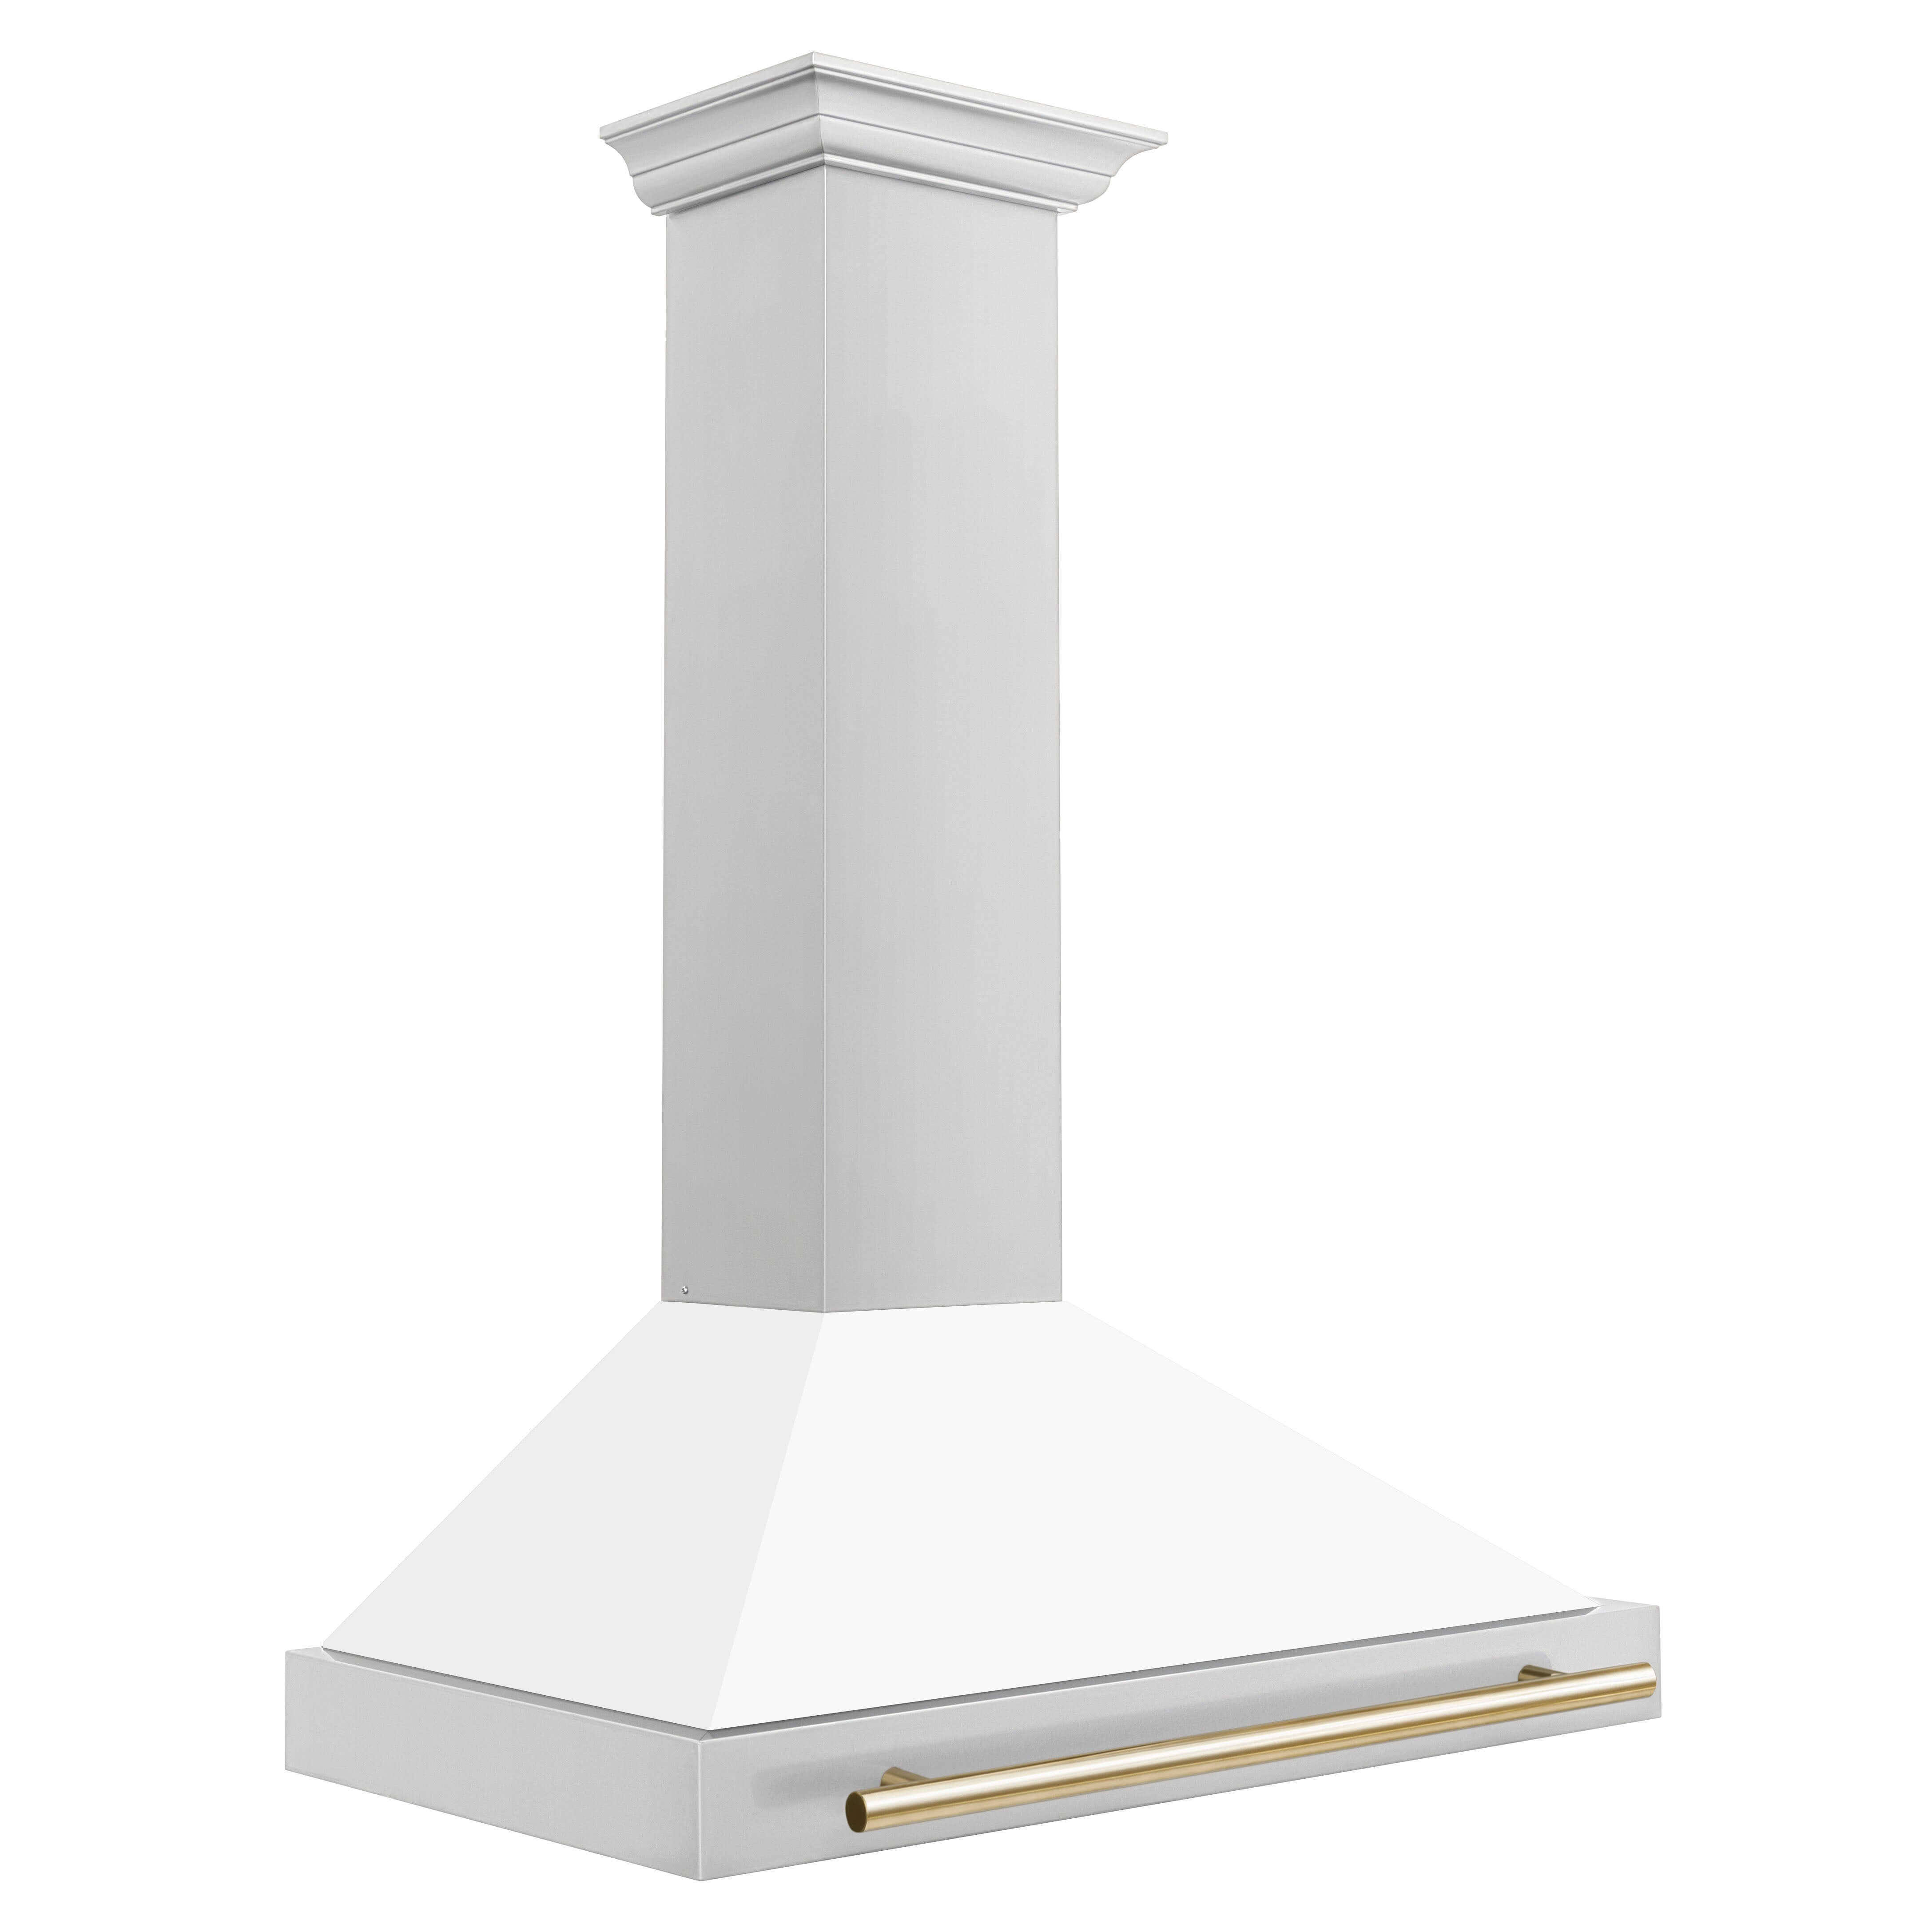 ZLINE 36 in. Autograph Edition Stainless Steel Range Hood with White Matte Shell and Gold Accents (KB4STZ-WM36) features crown molding.